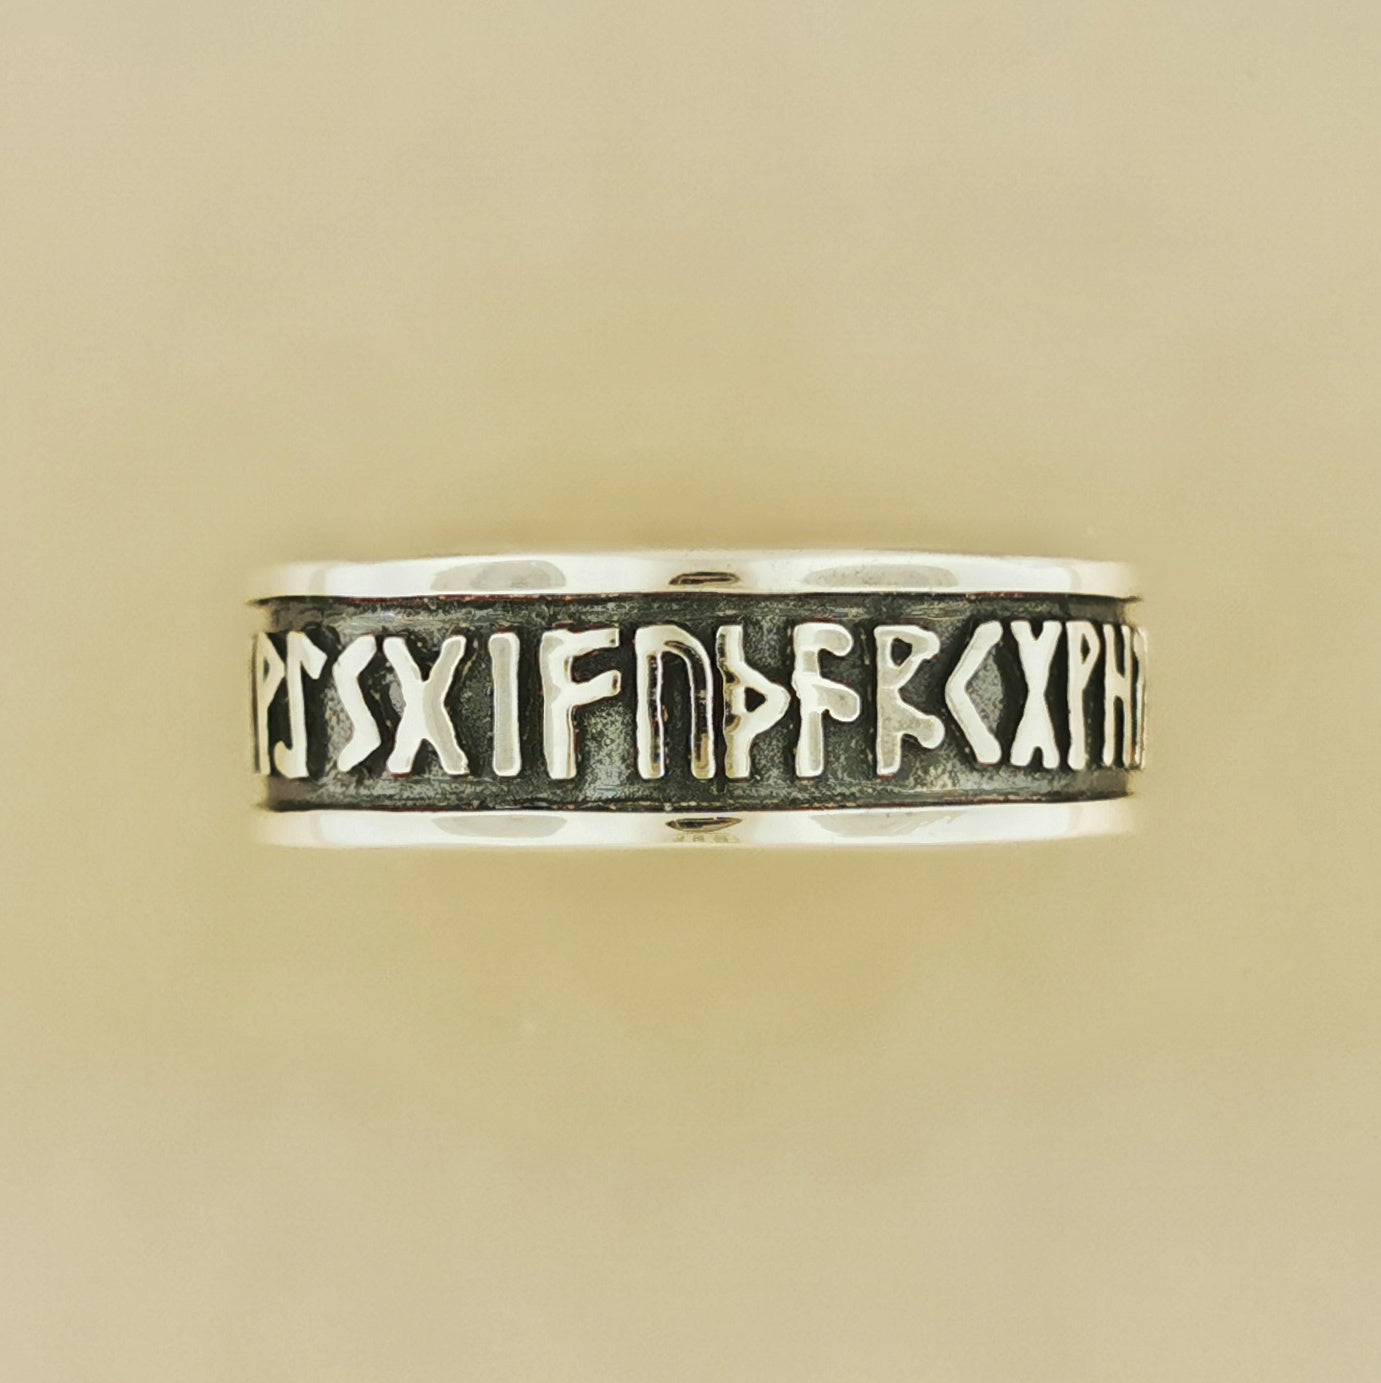 Norse Rune Band in Sterling Silver or Antique Bronze, Runic Alphabet Ring, Silver Viking Ring, 925 Rune Ring, 925 Silver Rune Ring, Sterling Silver Rune Band Ring, Viking Rune Ring, Nordic Silver Band, Elder Futhark Sterling Silver Ring